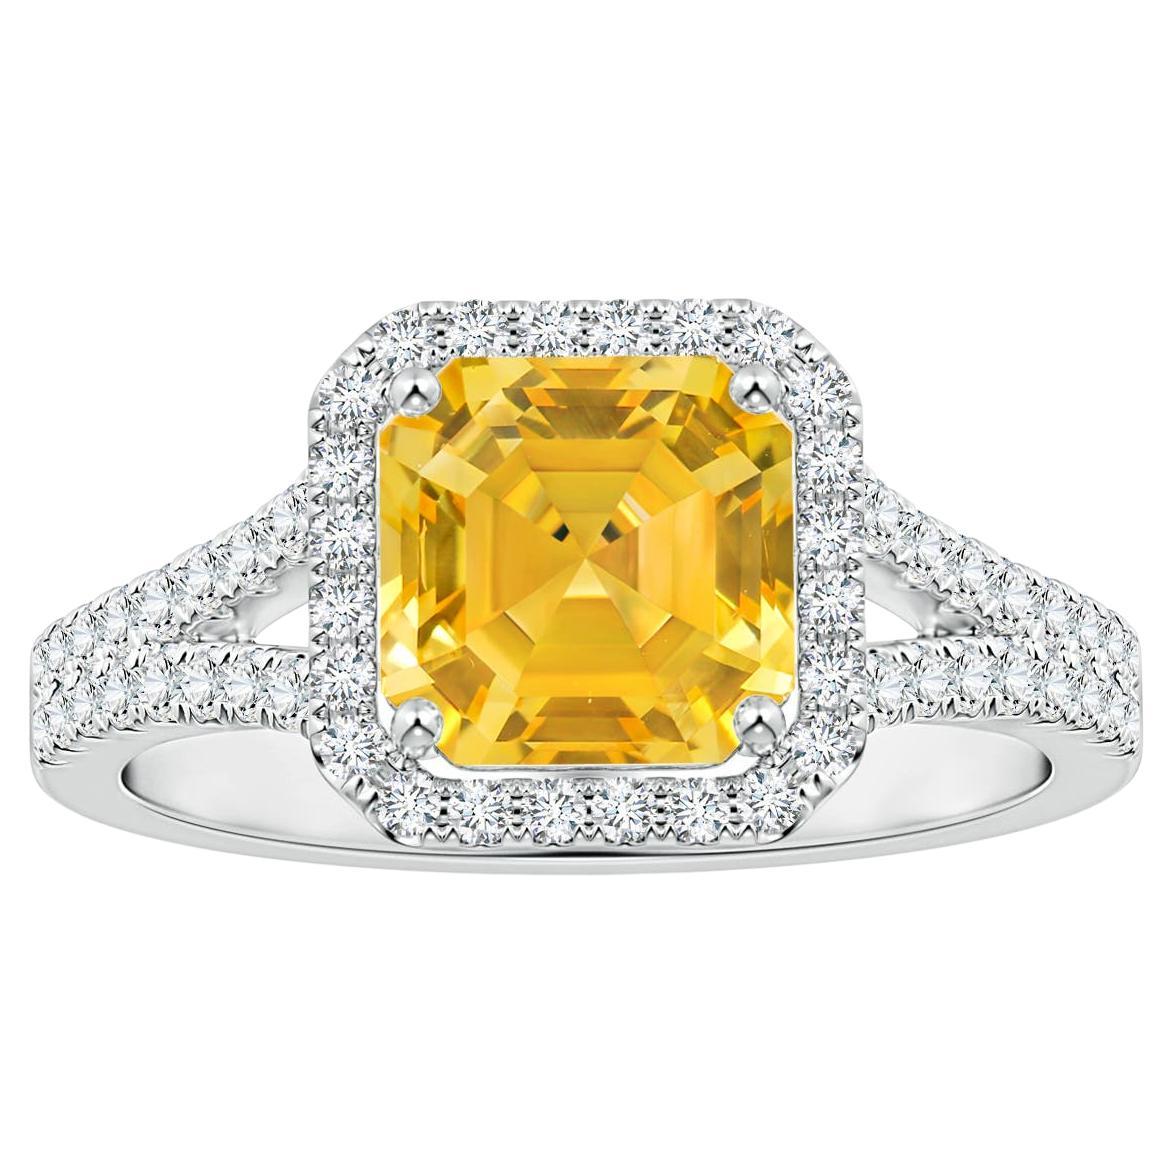 For Sale:  Angara GIA Certified Natural Emerald-Cut Yellow Sapphire Halo Ring in Platinum